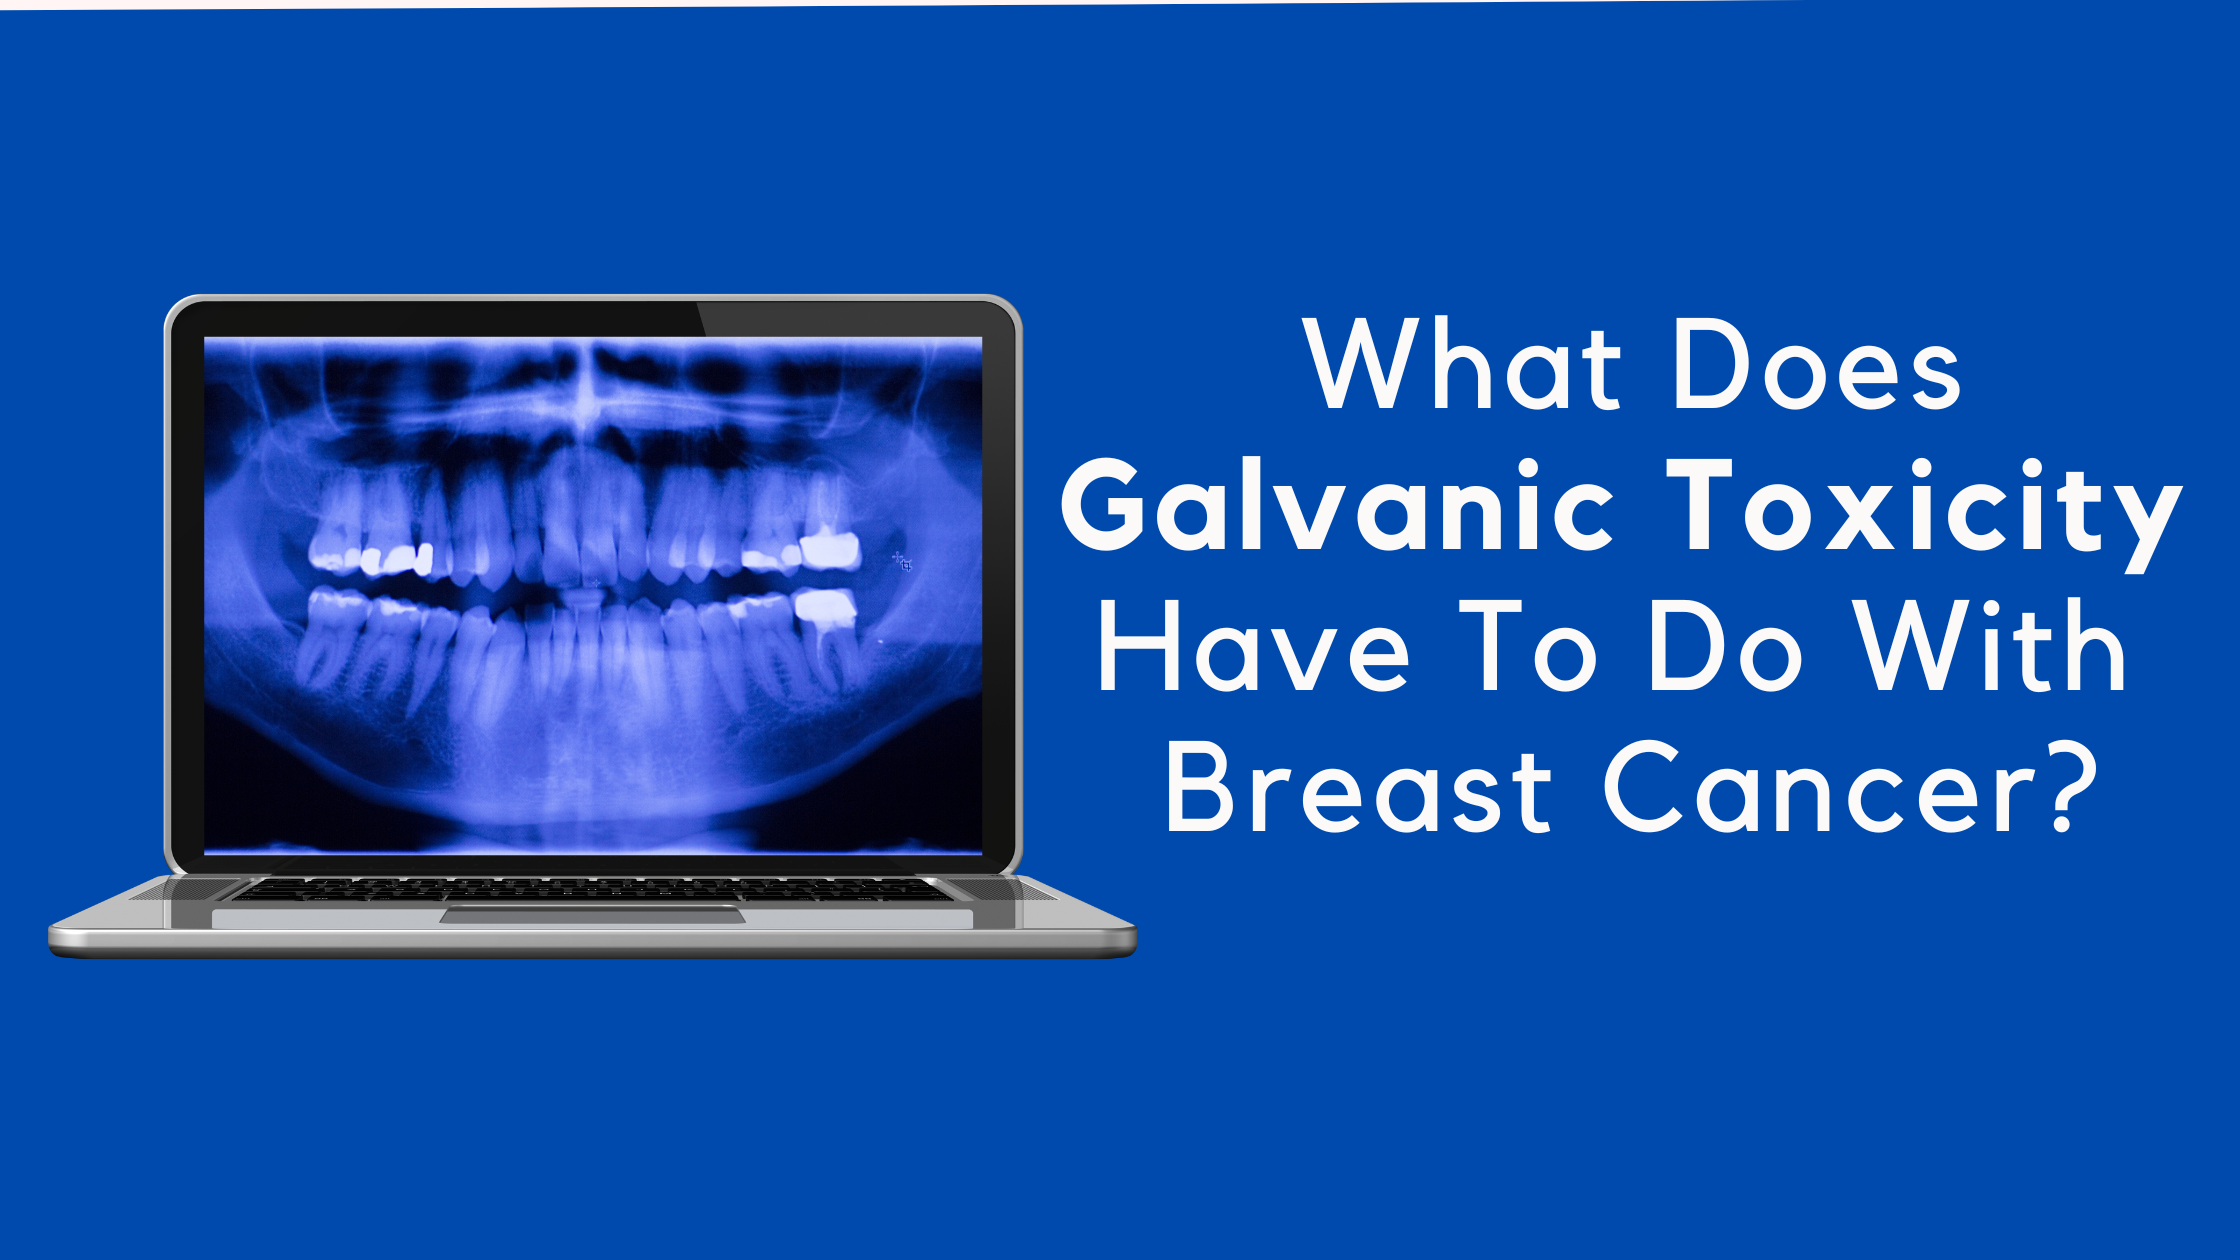 What Does Galvanic Toxicity Have To Do With Breast Cancer?